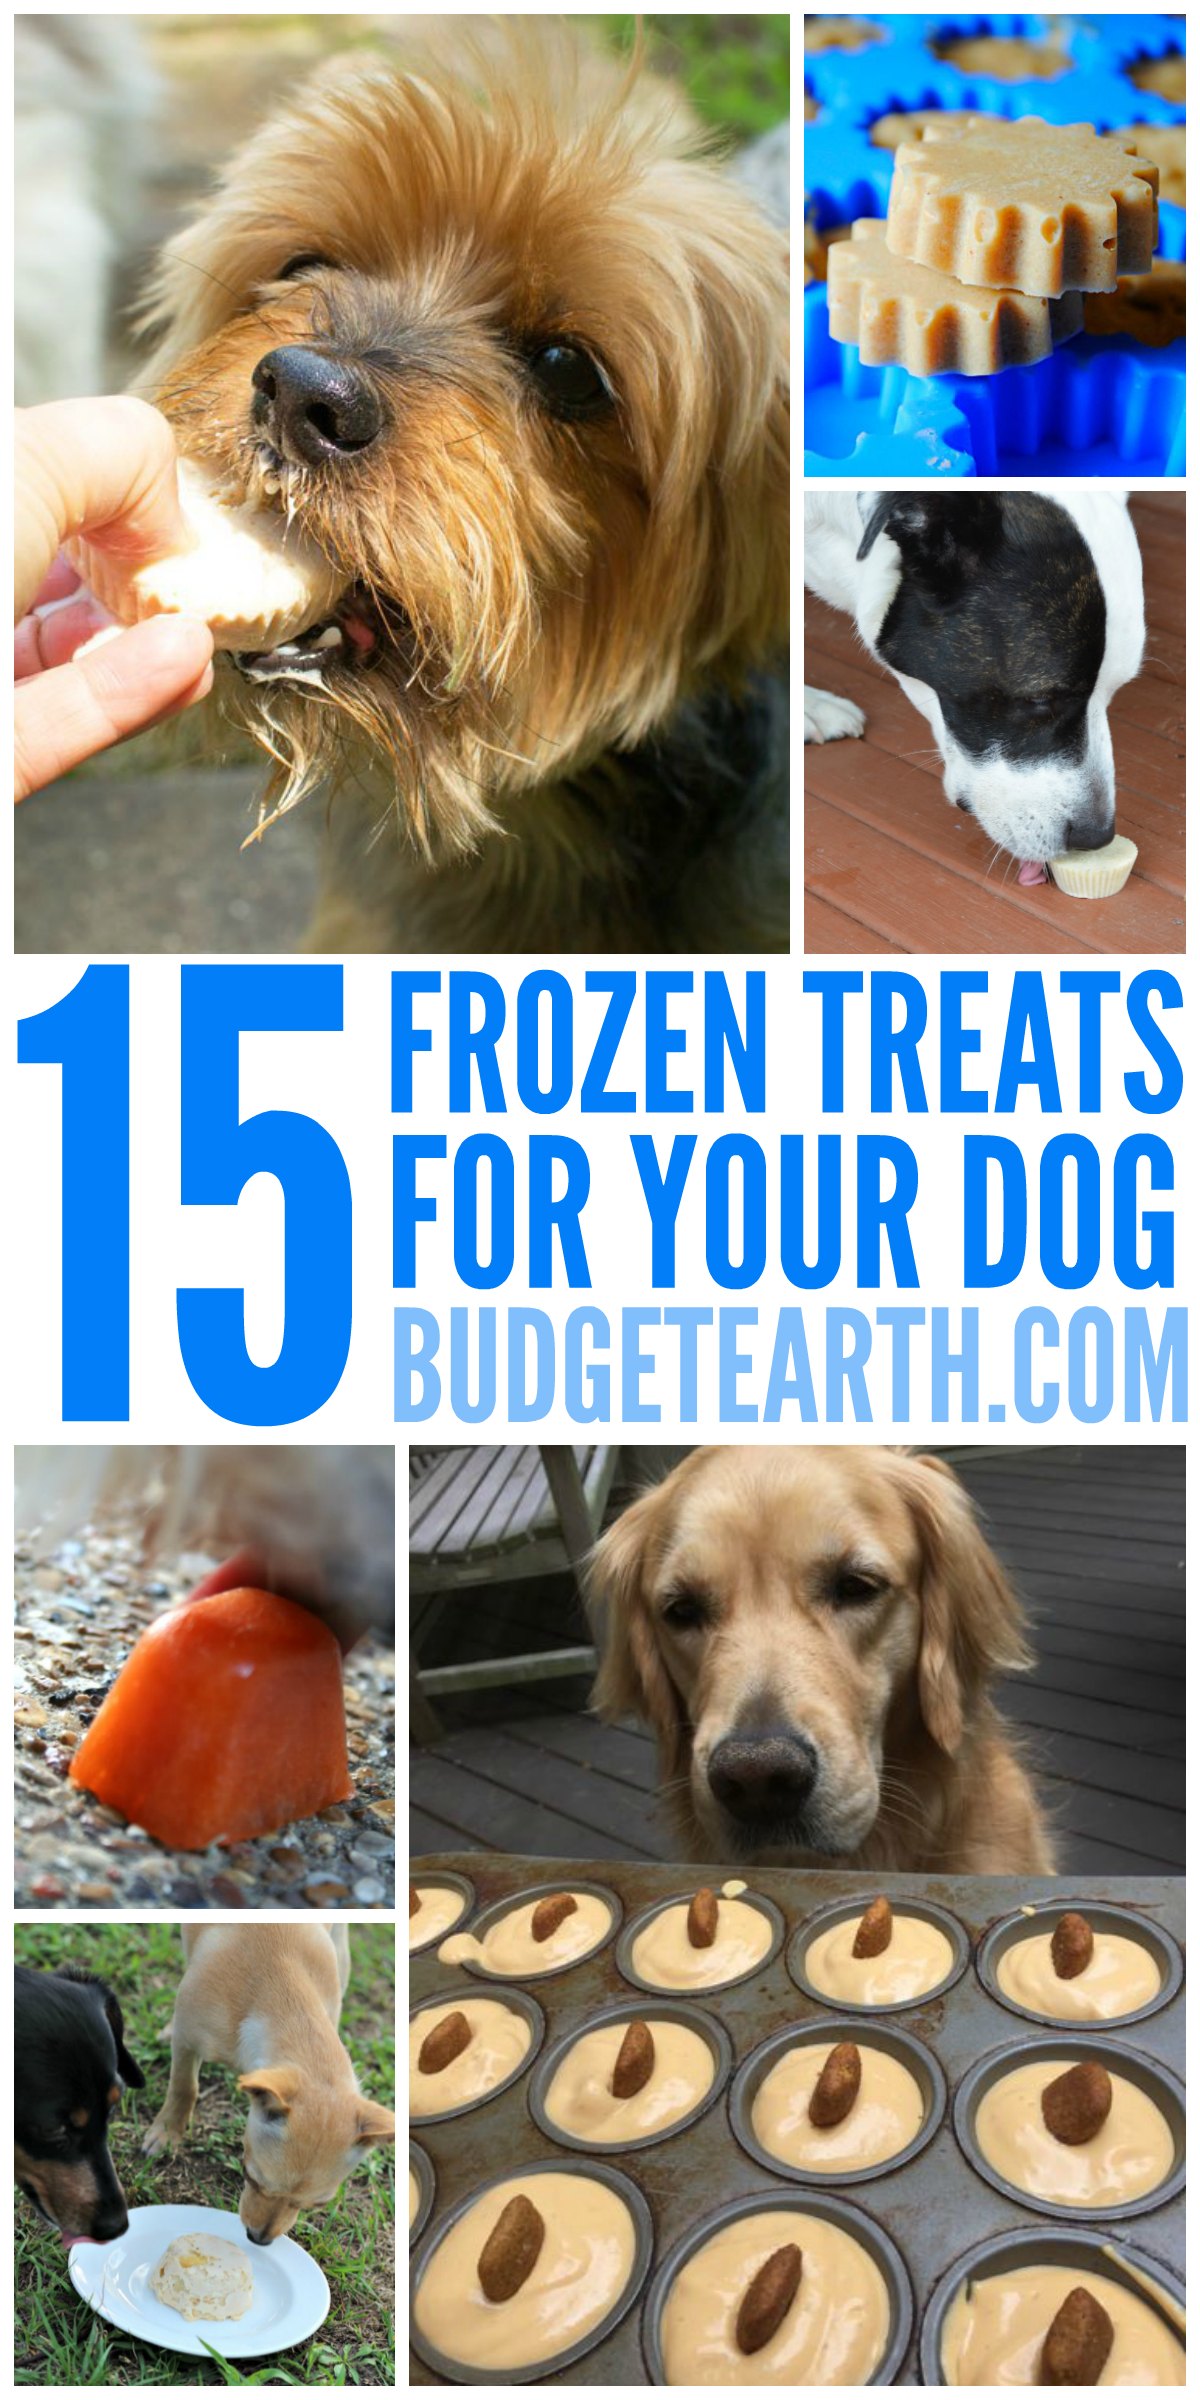 Looking for some delicious summer treats for your dog? Check out these 15 Frozen Treat Recipes for dogs here! 